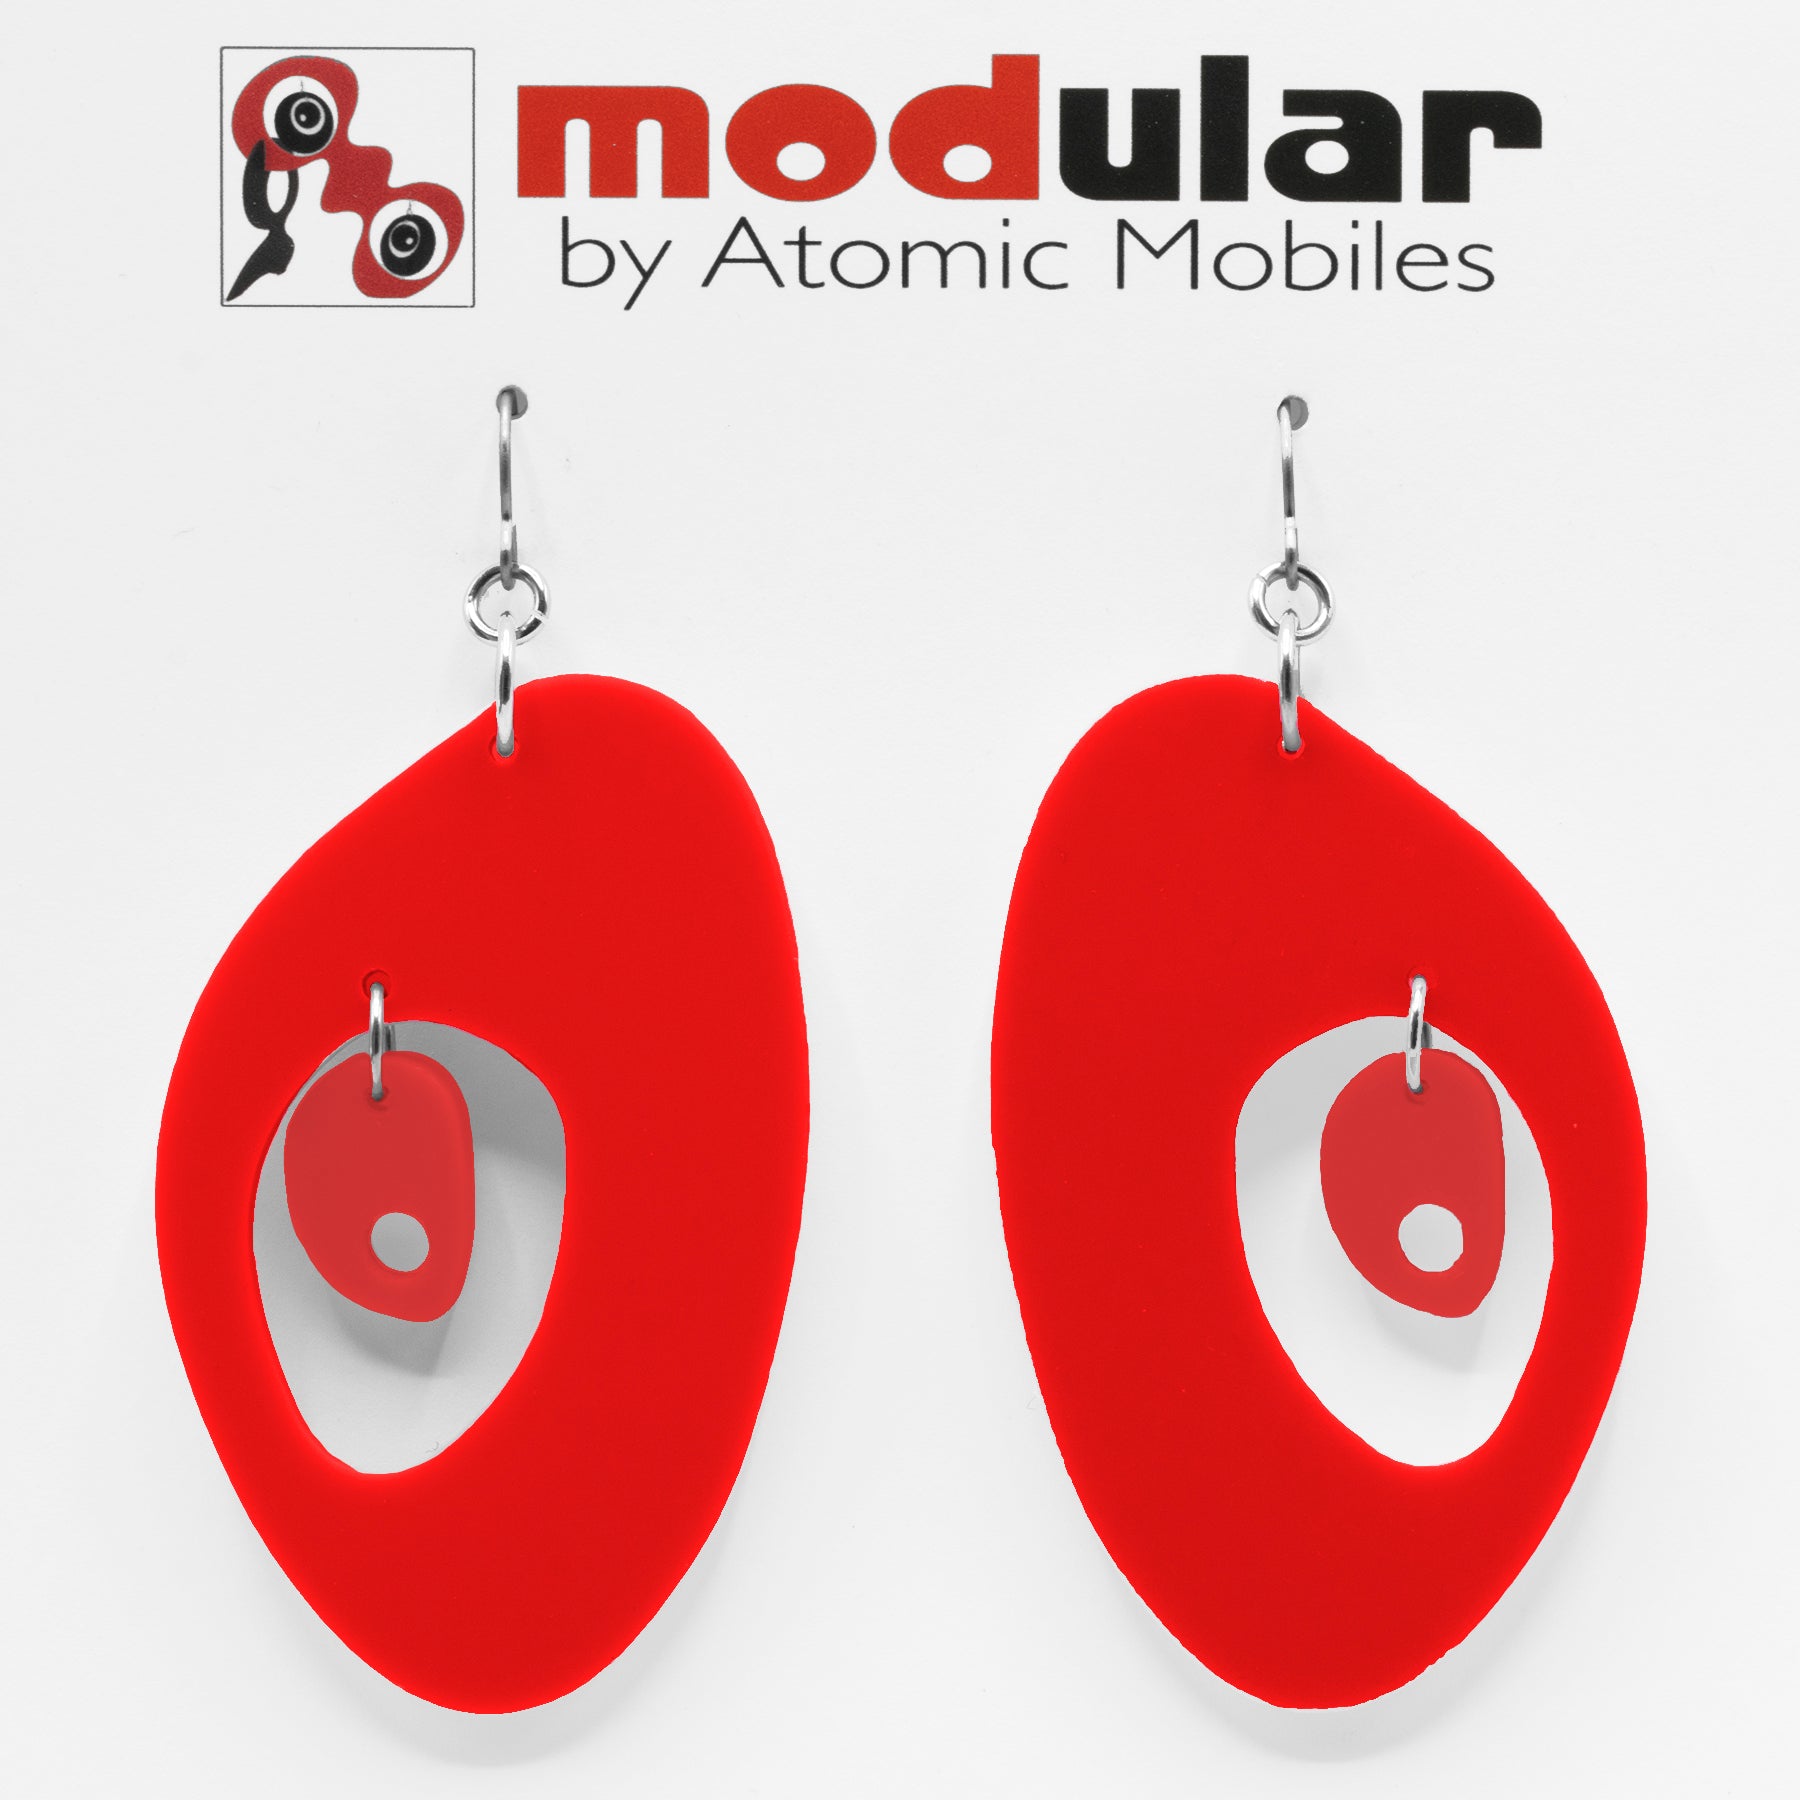 MODular Earrings - The Modernist Statement Earrings in Red by AtomicMobiles.com - retro era inspired mod handmade jewelry